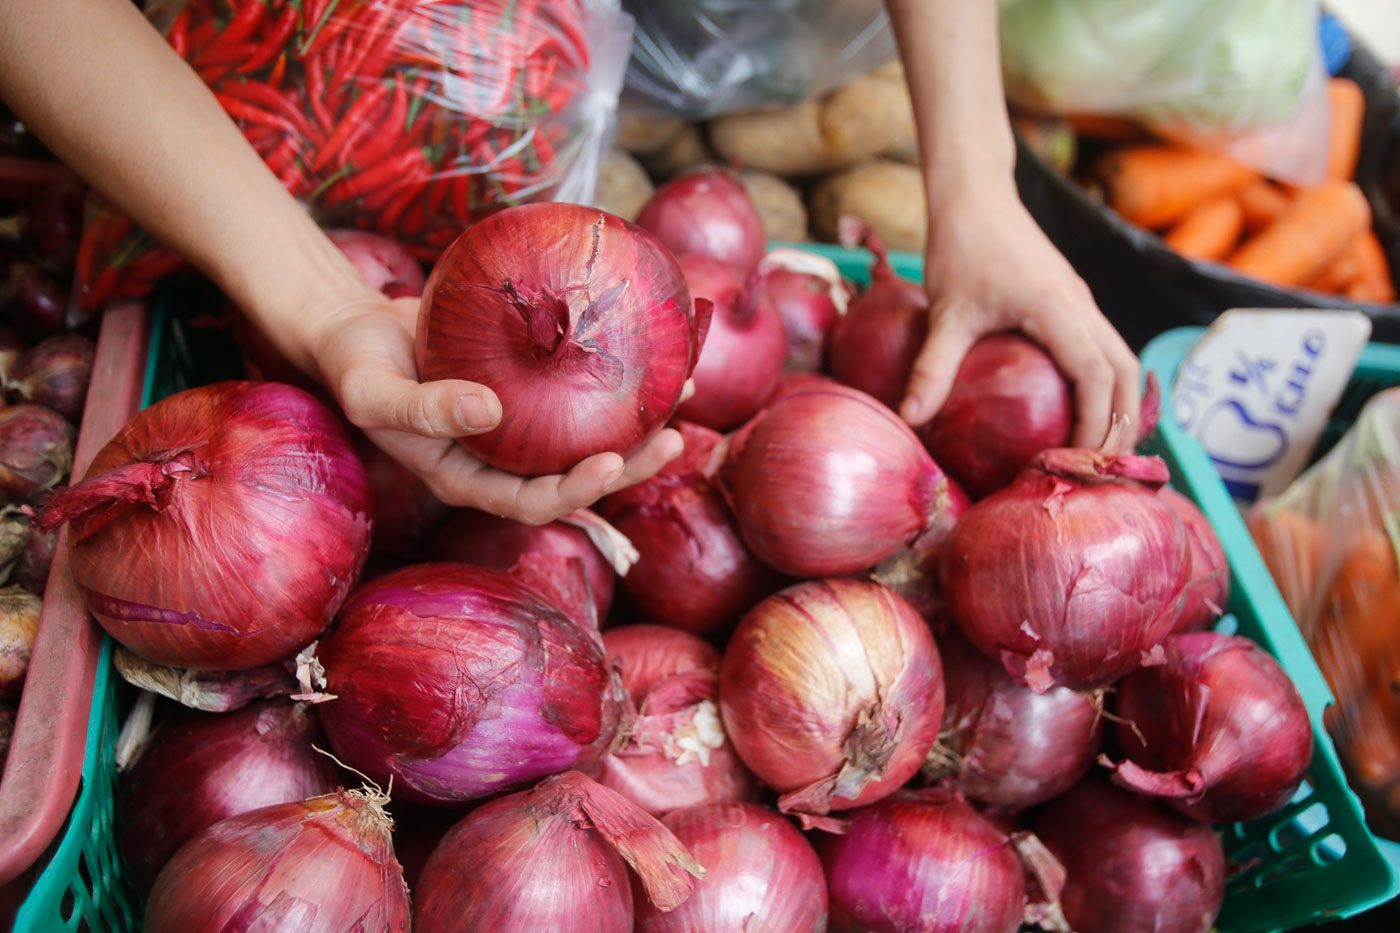 Ombudsman suspends gov’t officials over ‘anomalous’ onion deal. Here’s why.